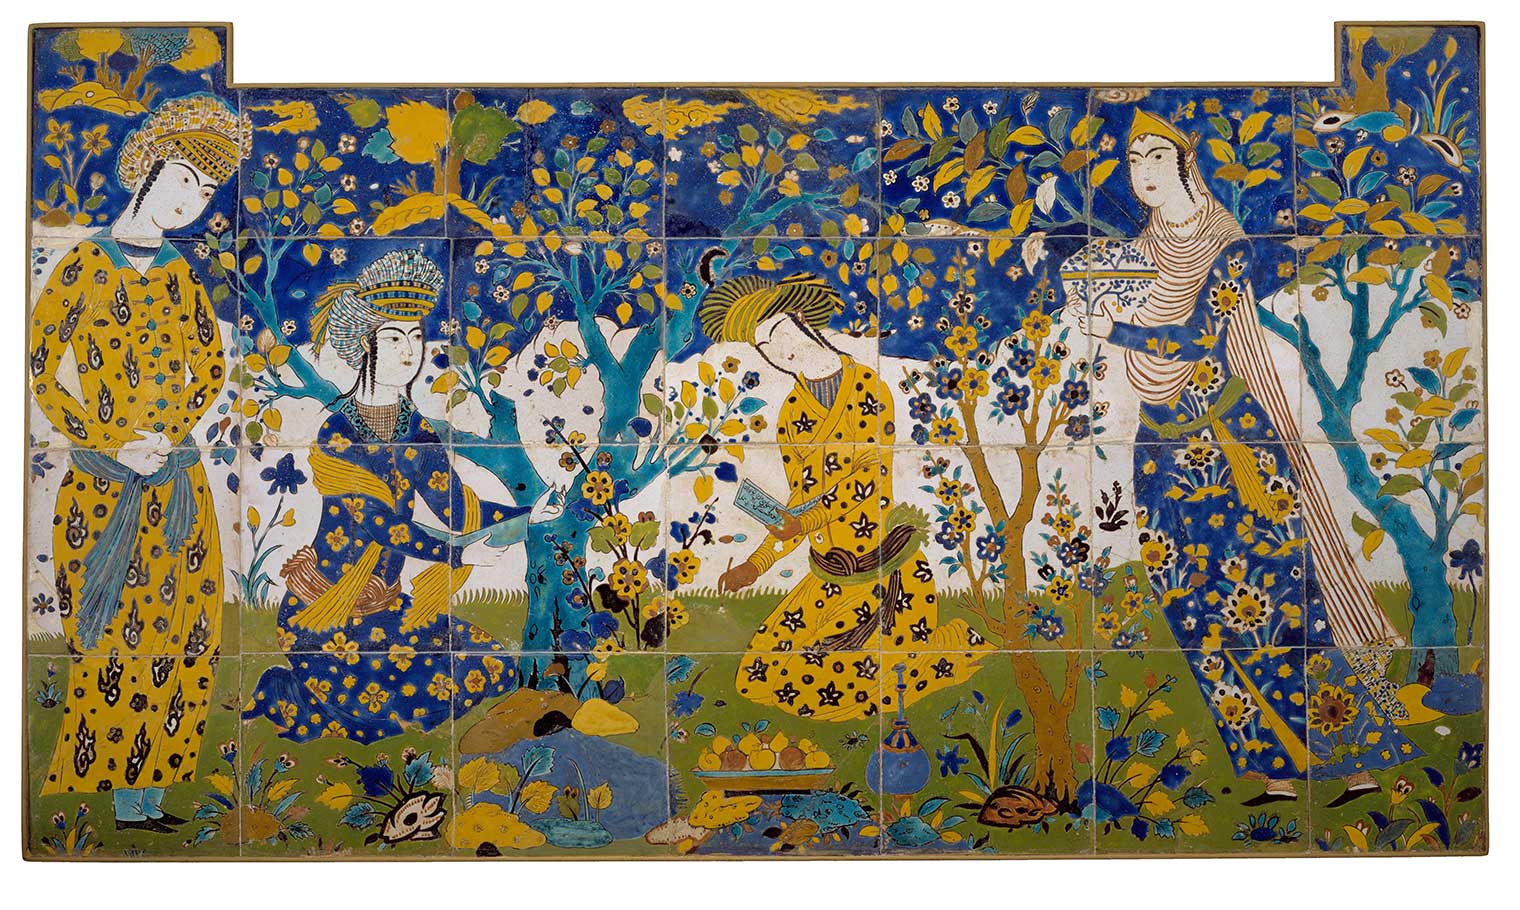 A series of tile depicting a lush landscape setting of a picnic with men and women enjoying fruit and beverages. They are wearing patterned robes, silk sashes, and striped turbans as depicted in seventeenth-century Persian drawings and paintings.  